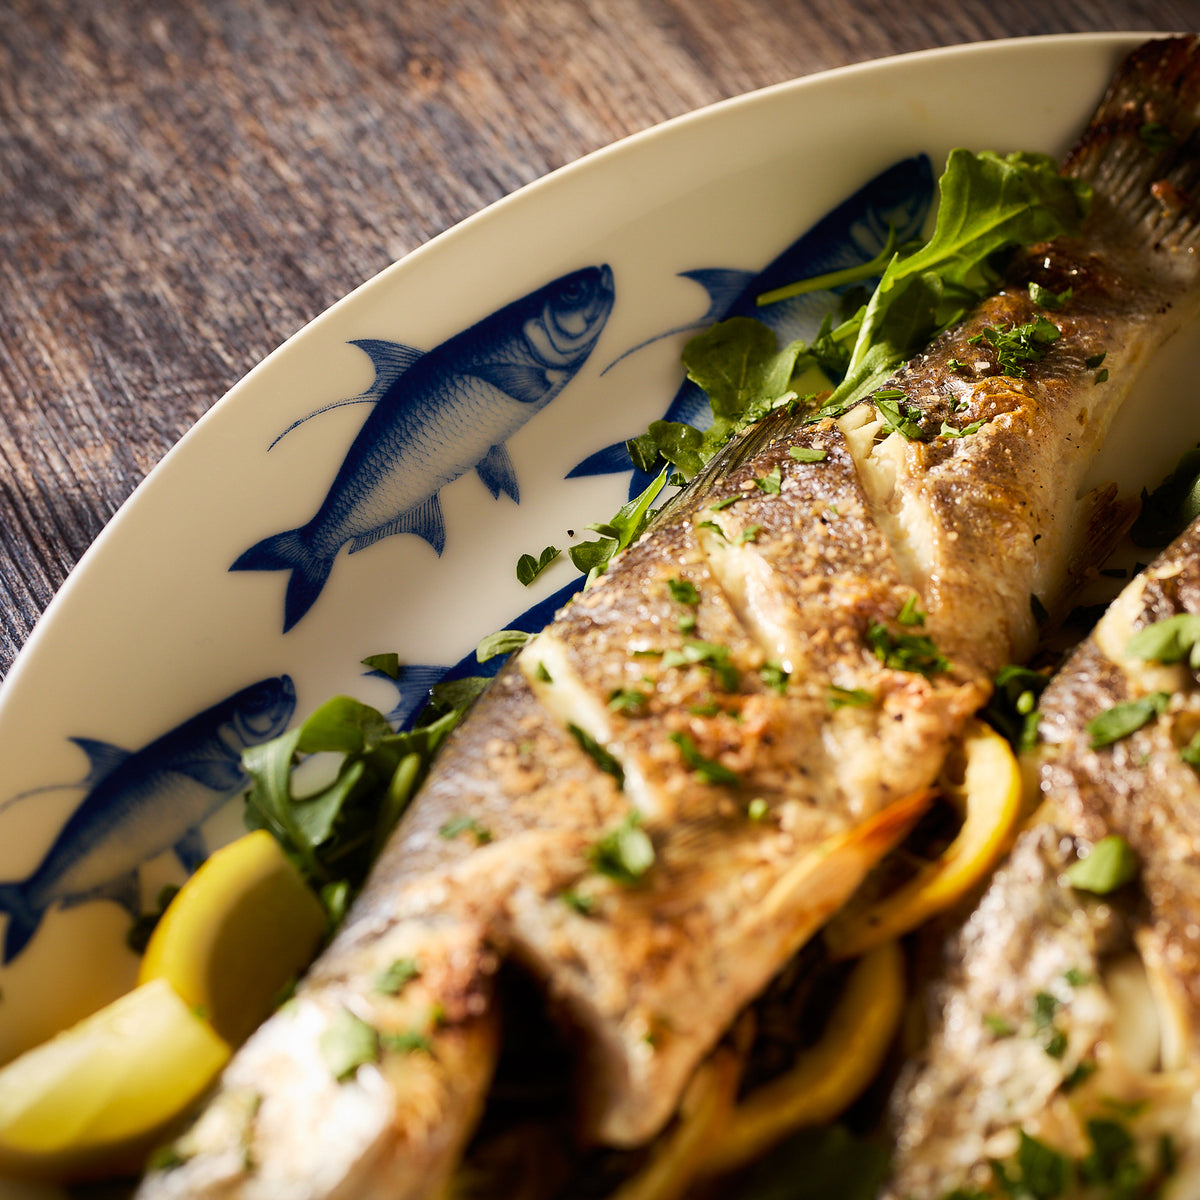 A cooked fish garnished with herbs and lemon slices is served on a white plate with fish illustrations, reminiscent of a cozy lake house meal, placed on a wooden surface, using the Lake House Bundle by Caskata.